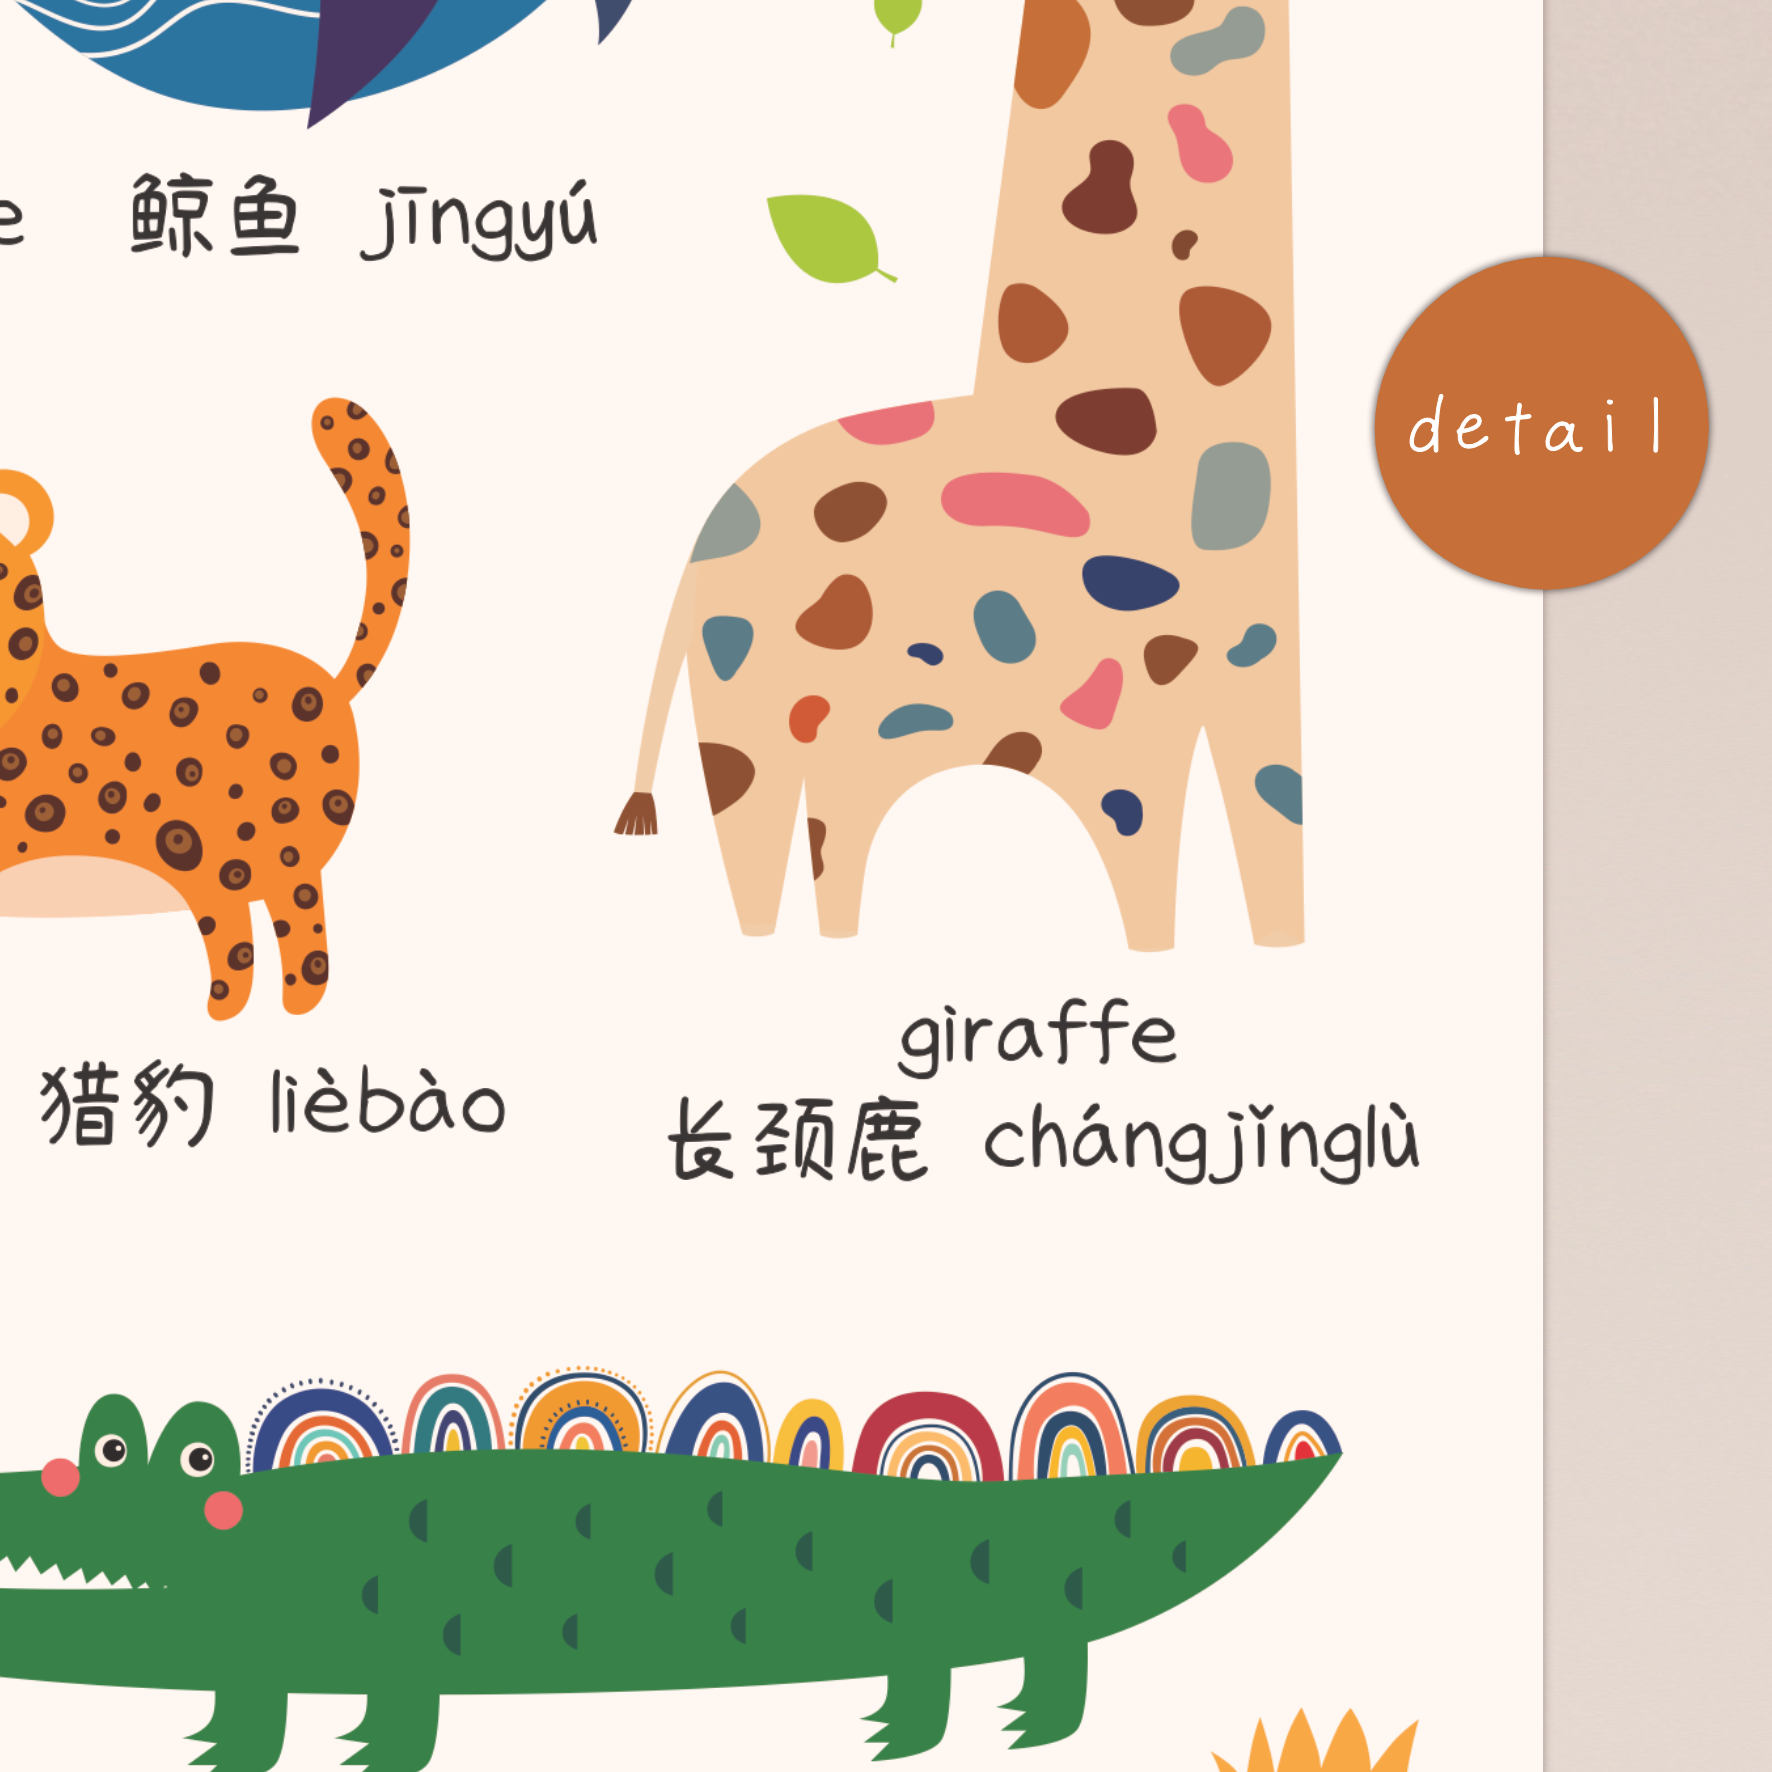 A bilingual educational print featuring animals labeled in English and Chinese, Korean, Japanese, French, Spanish, Vietnamese, Thai, or Tagalog. The print displays cute, colorful illustrations of the following animals: zebra, elephant, tiger, lion, whale, bee, cheetah, giraffe toucan, and crocodile . This bilingual display aids in language acquisition and cross-cultural learning.